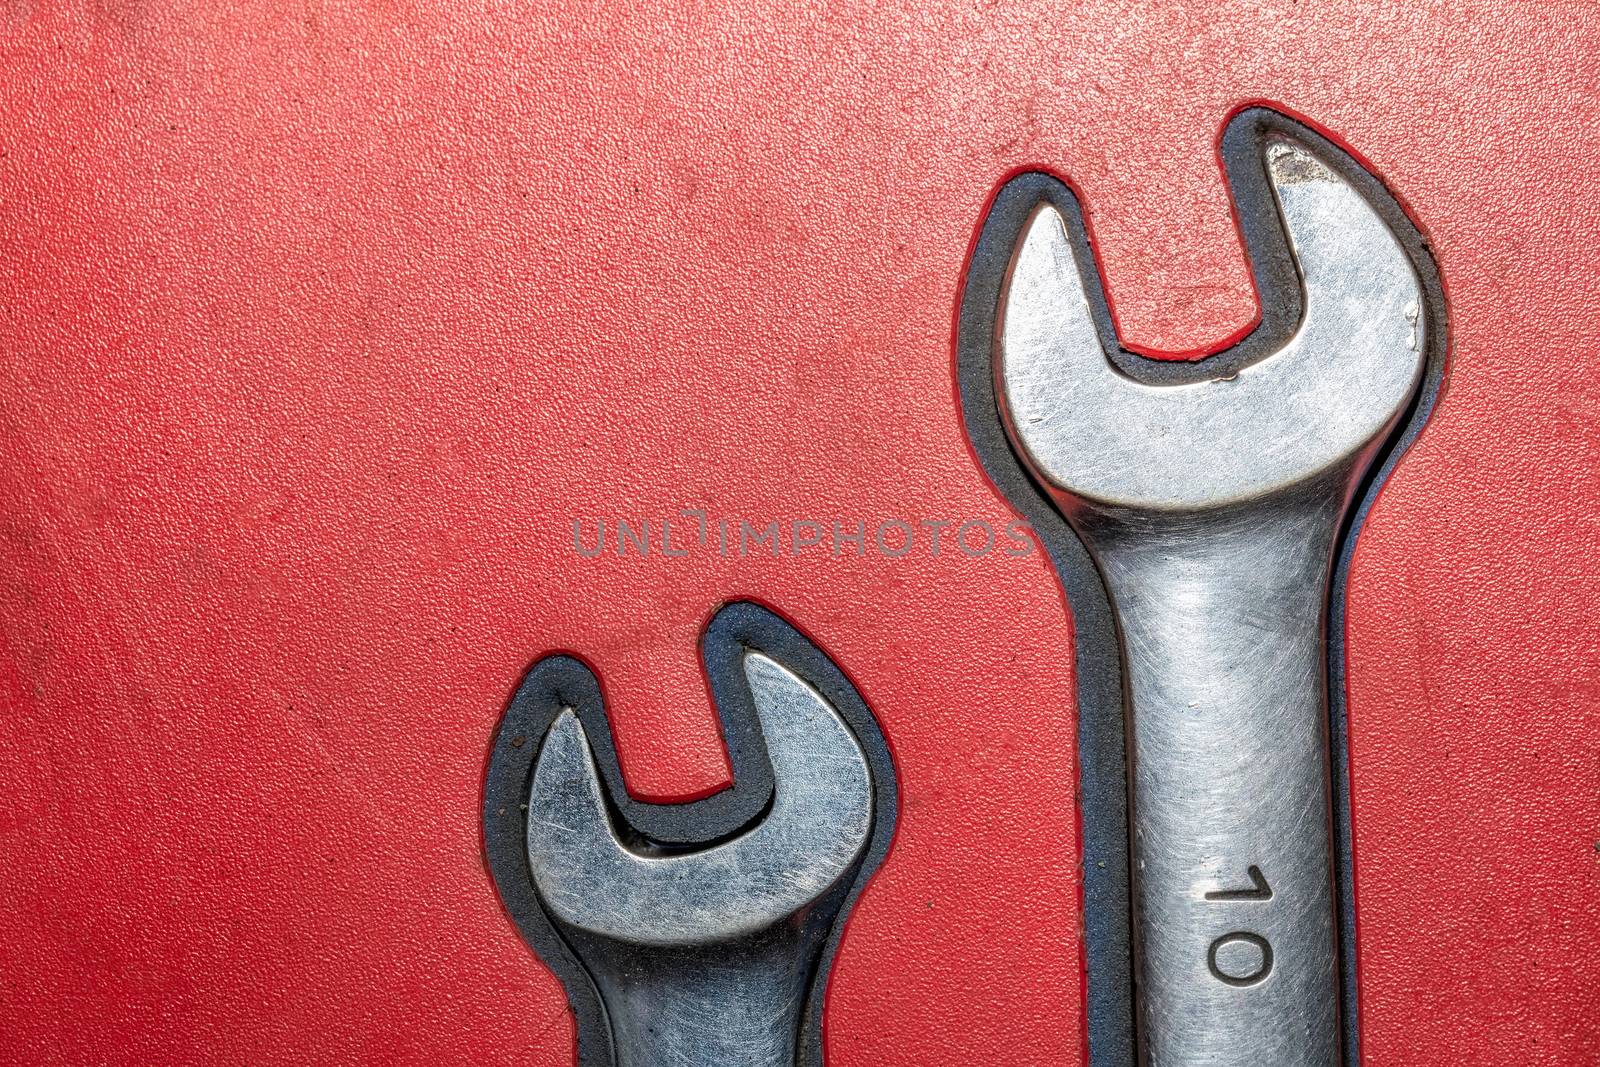 Close-up of two old chrome wrenches on red background.